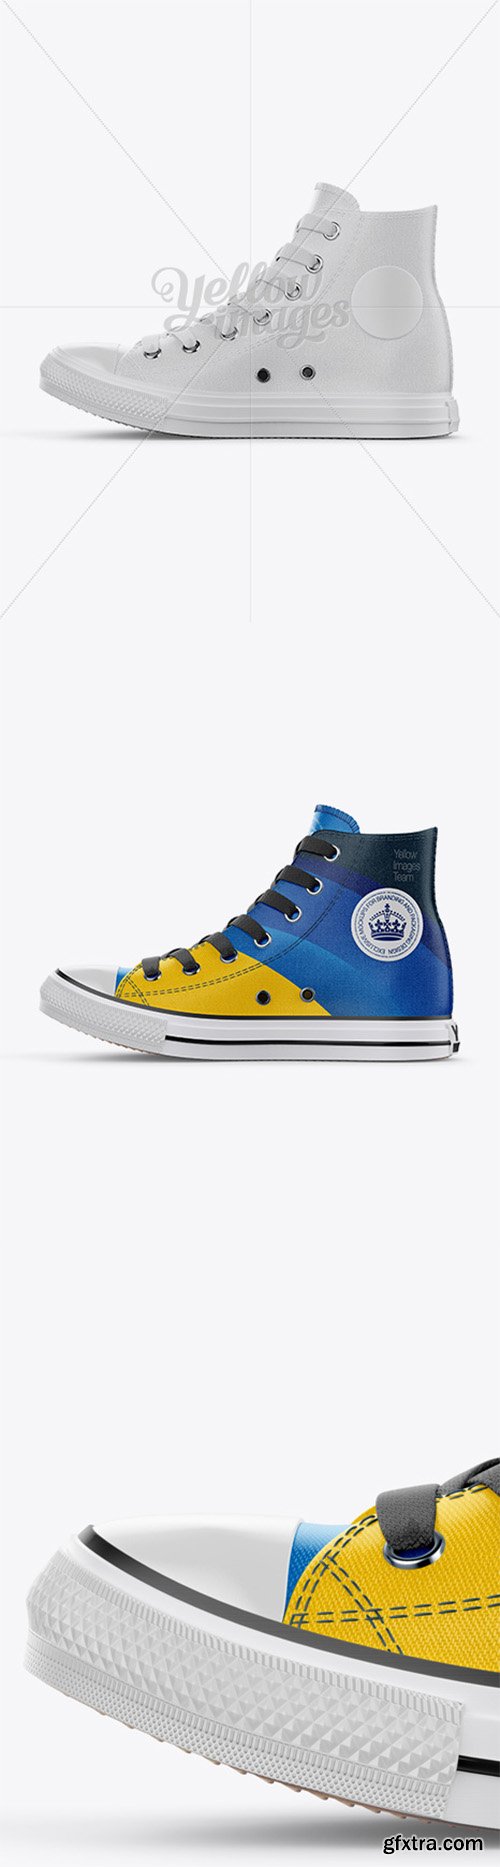 High-Top Canvas Sneaker Mockup - Side View 17622